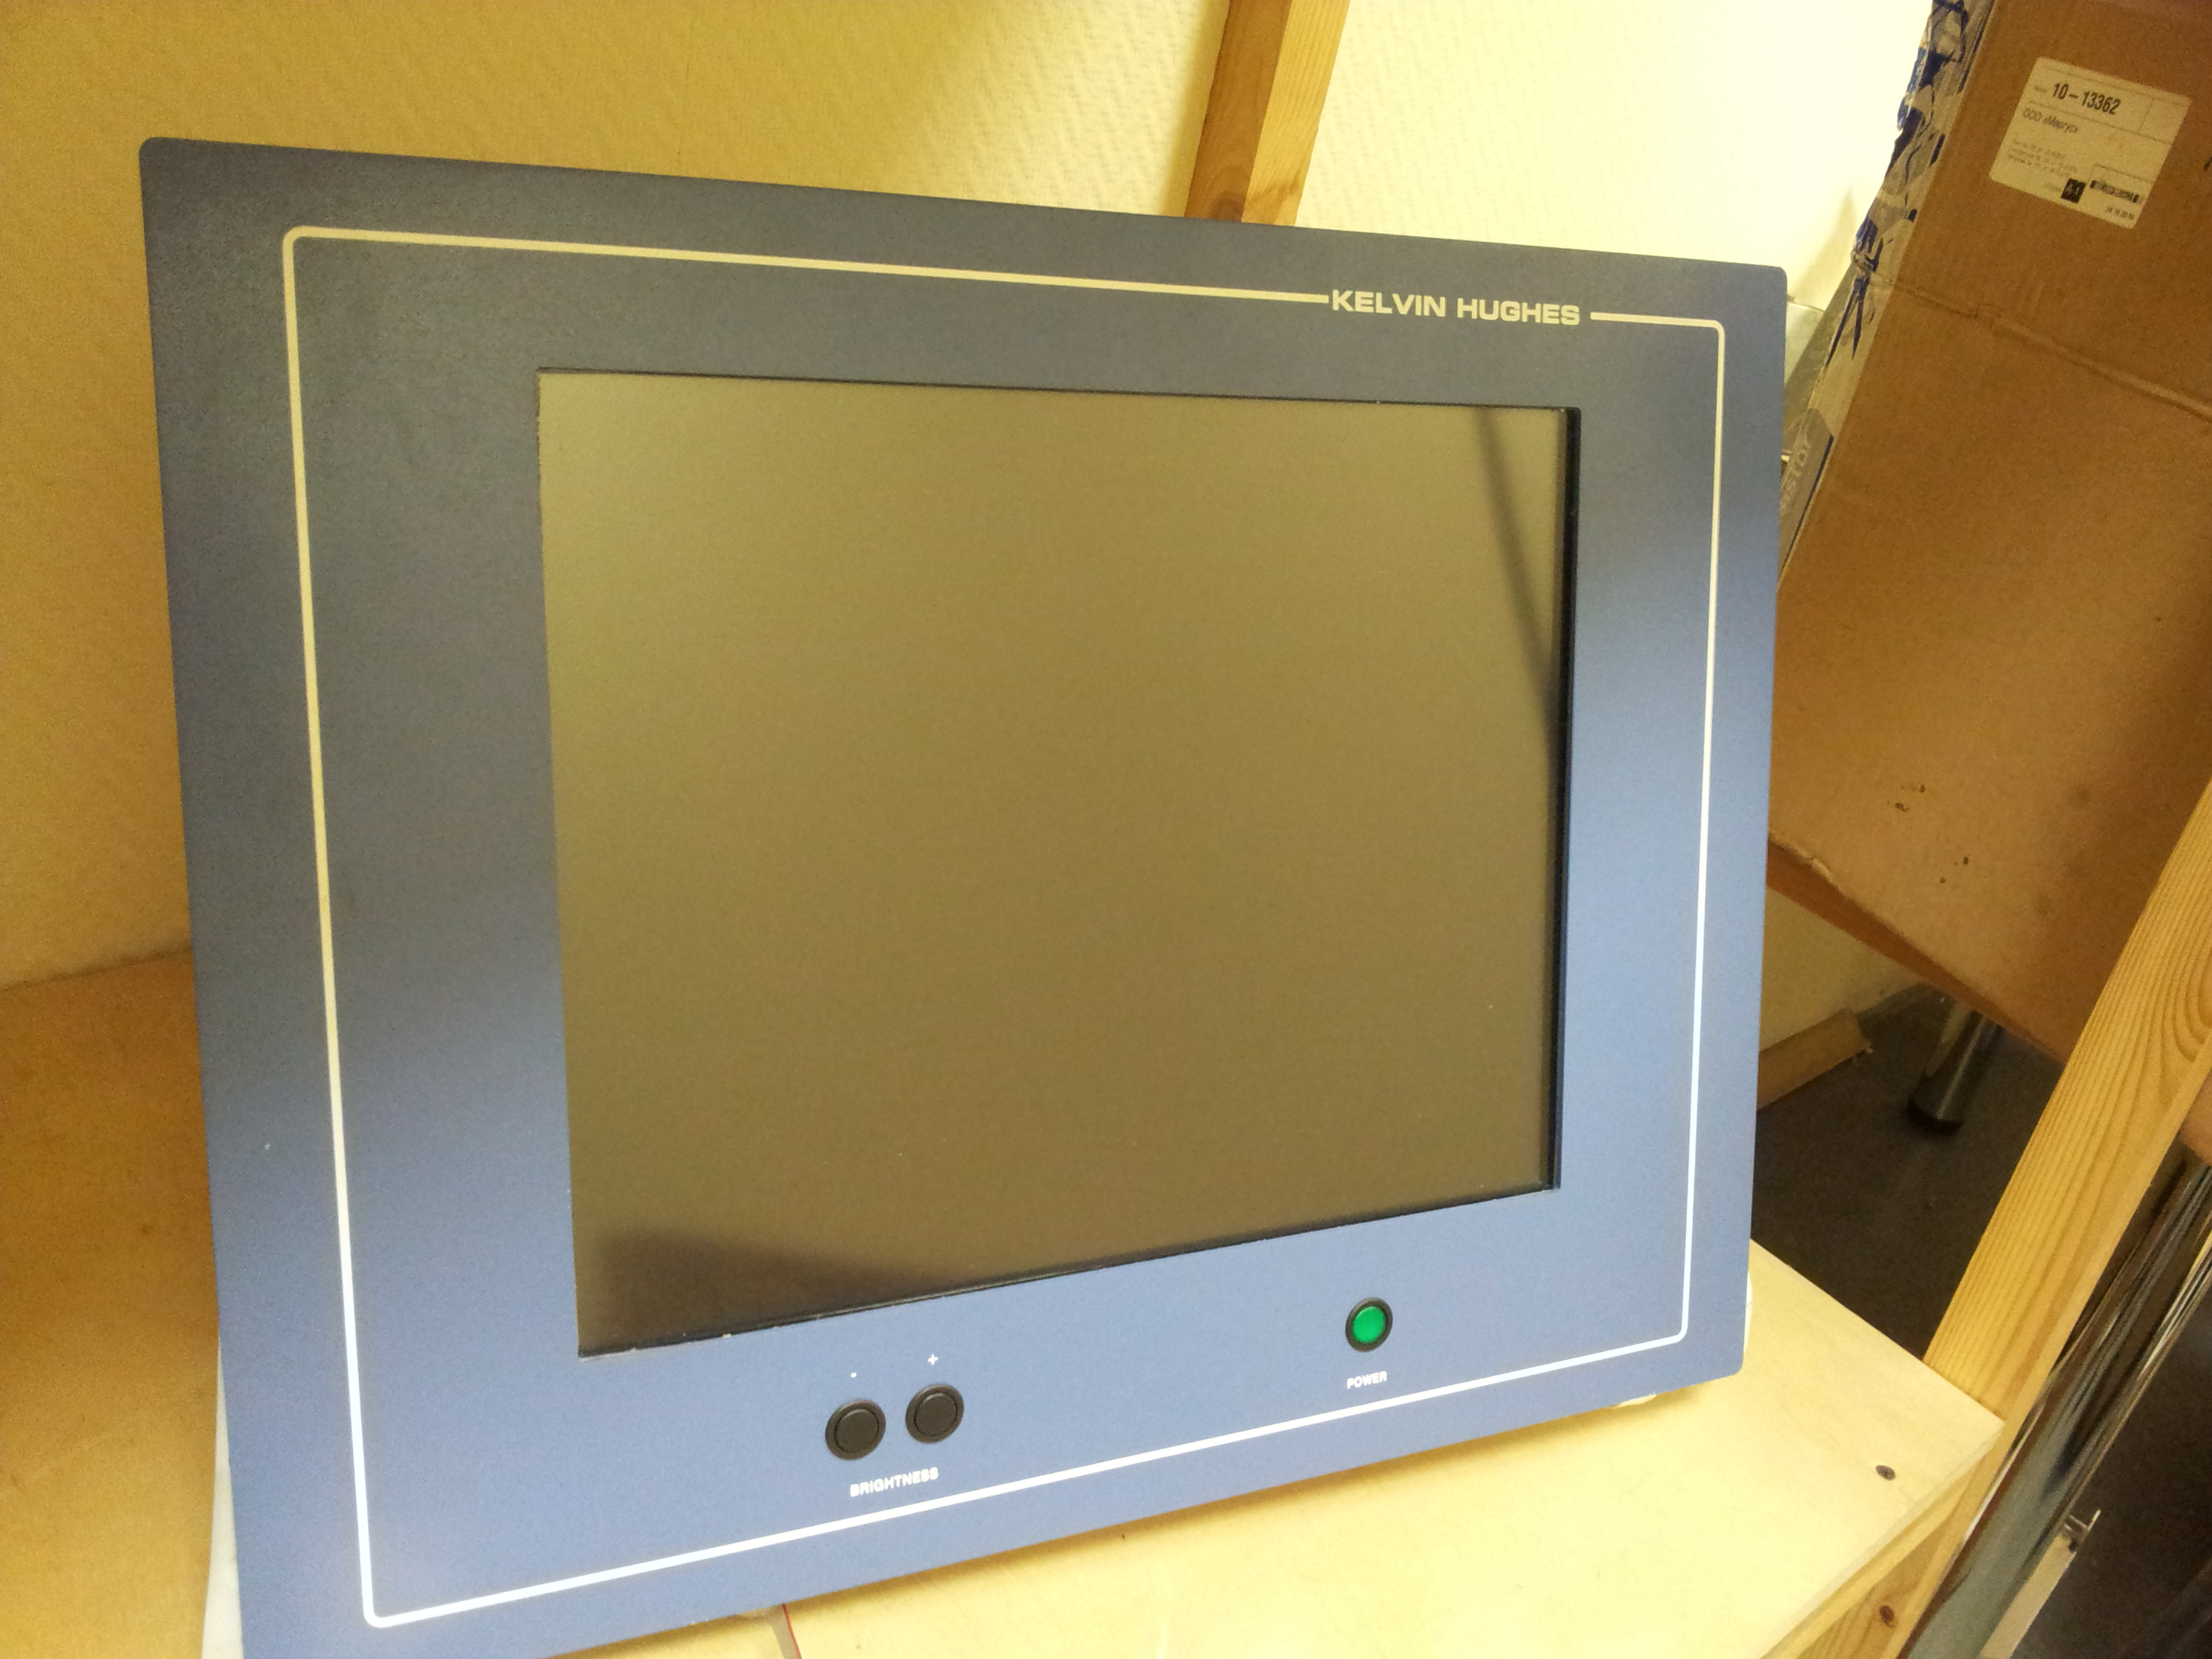 Replacing old kinescopes with old radars on LCD displays